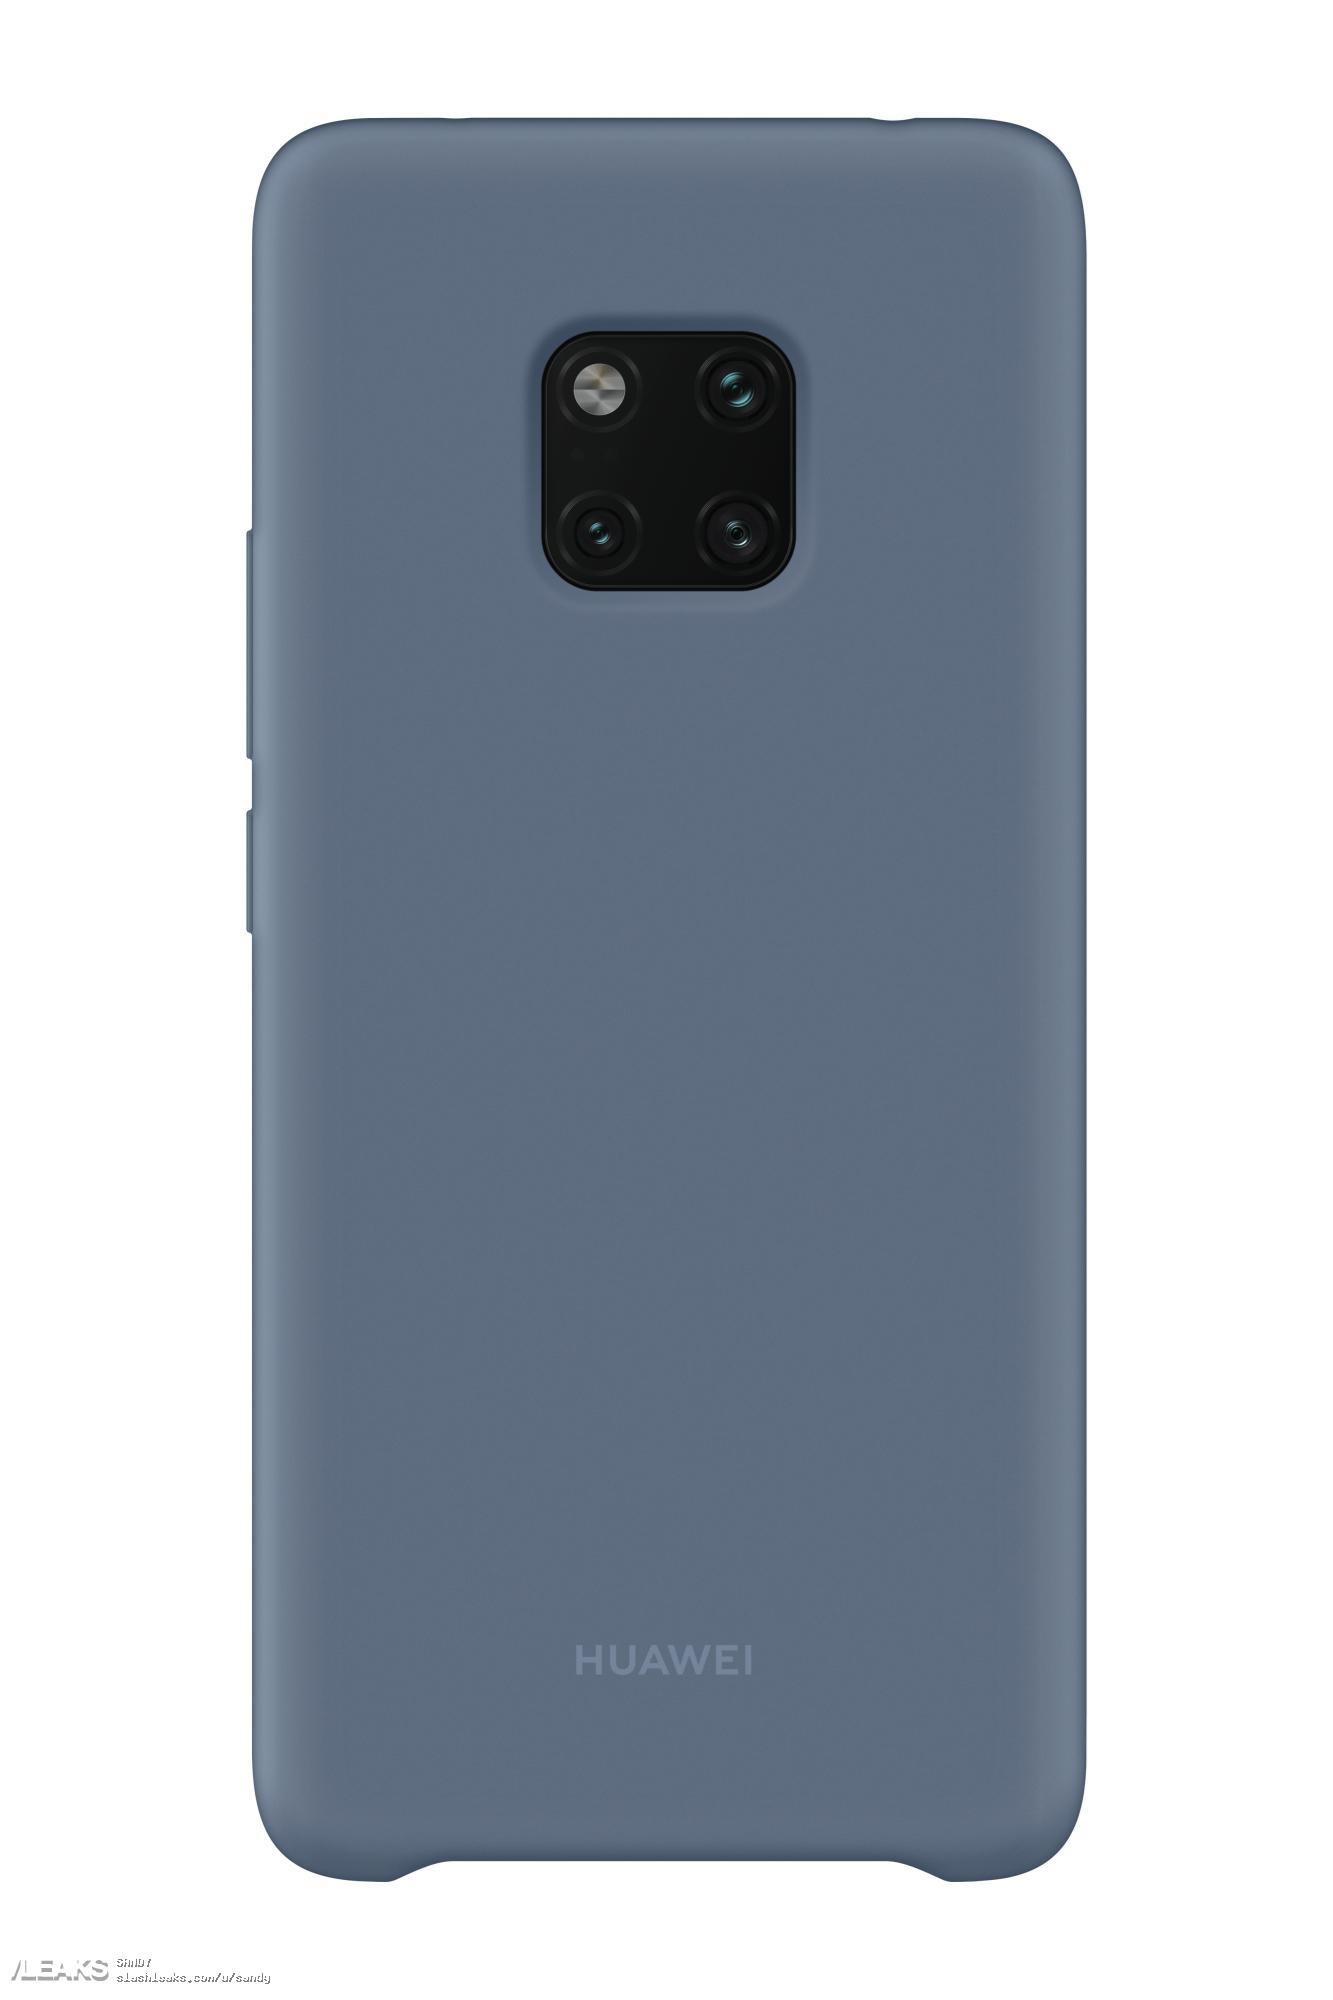 18-9-22-22224Huawei-Mate-20-Pro-inside-official-cases.jpg